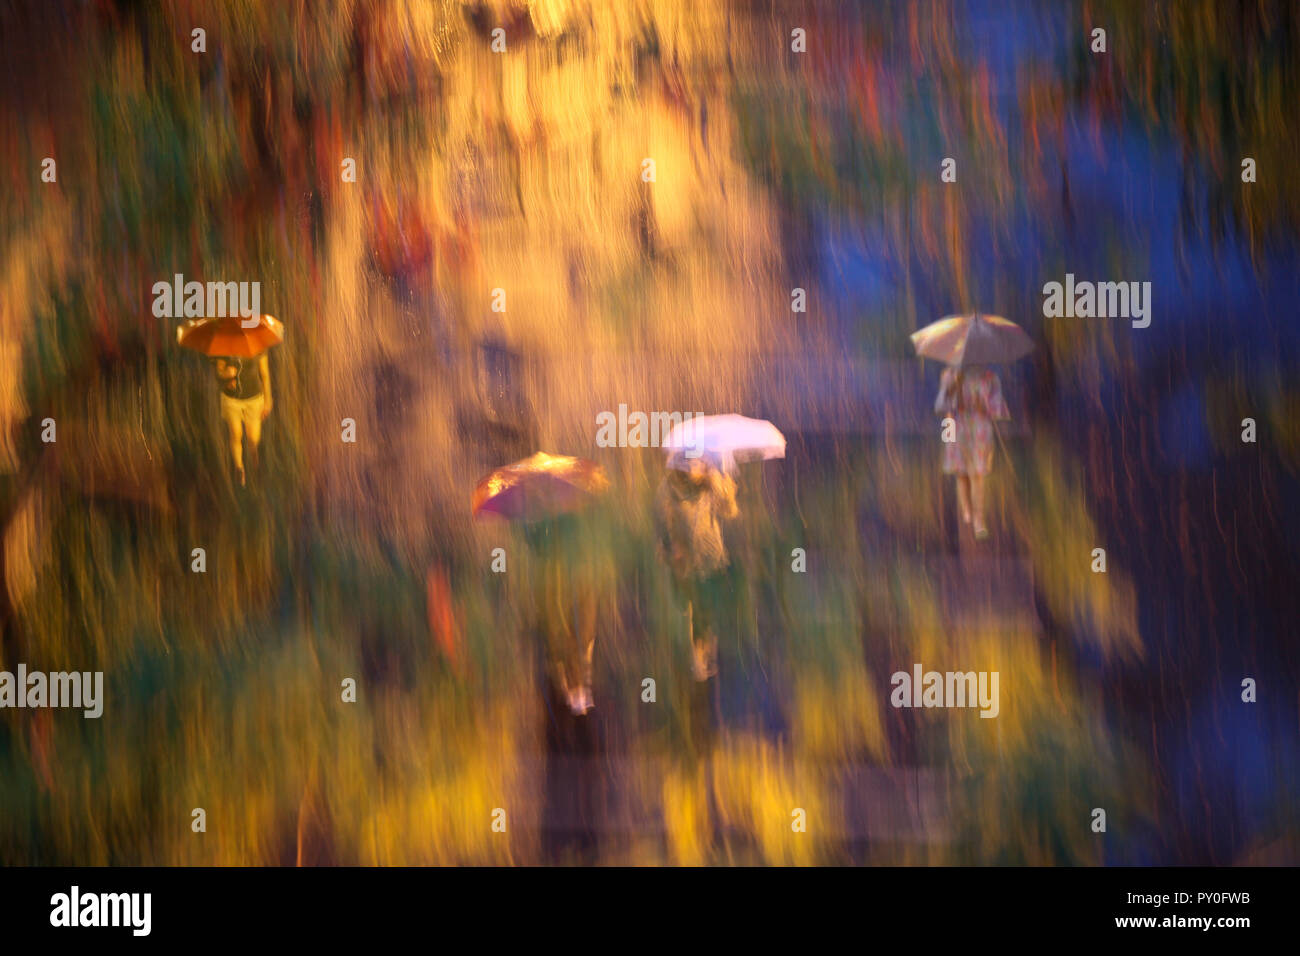 Blurred image of people walking in rain in Central Park, New York City, New York, USA Stock Photo